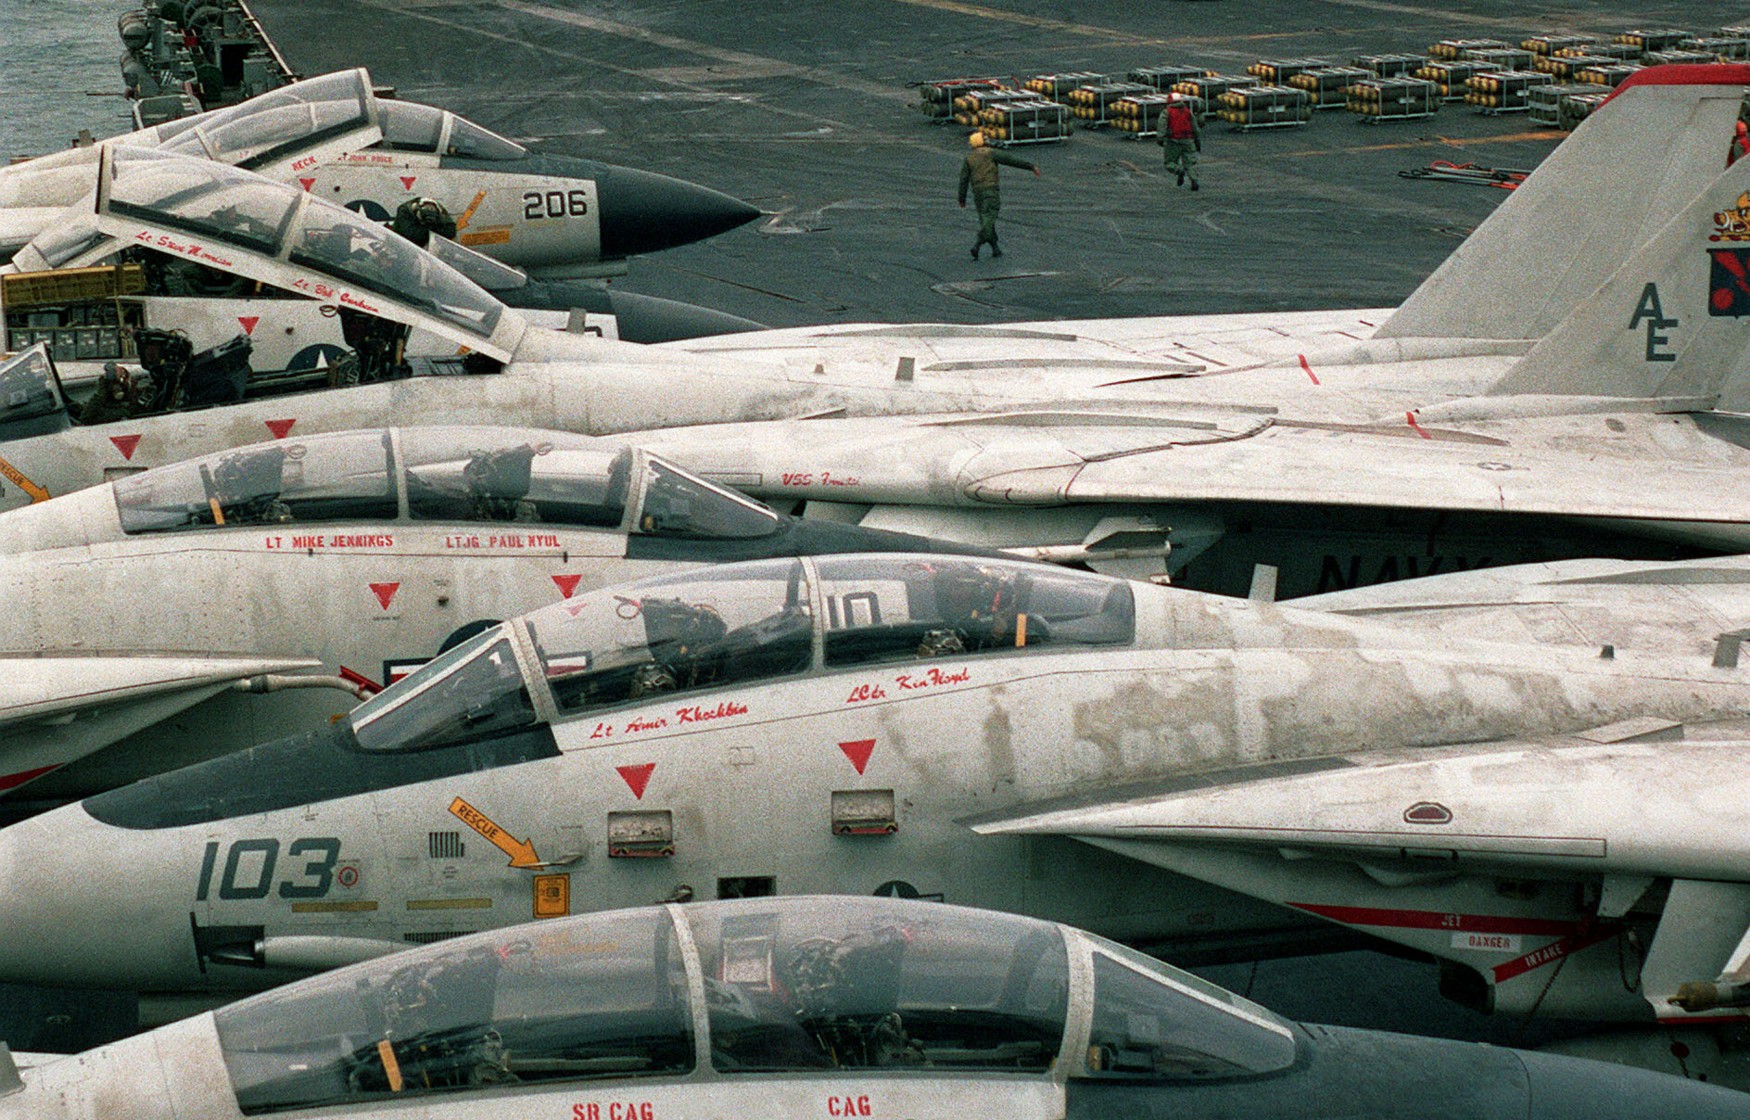 vf-11 red rippers fighter squadron us navy fitron f-14a tomcat carrier air wing cvw-6 uss forrestal cv-59 64